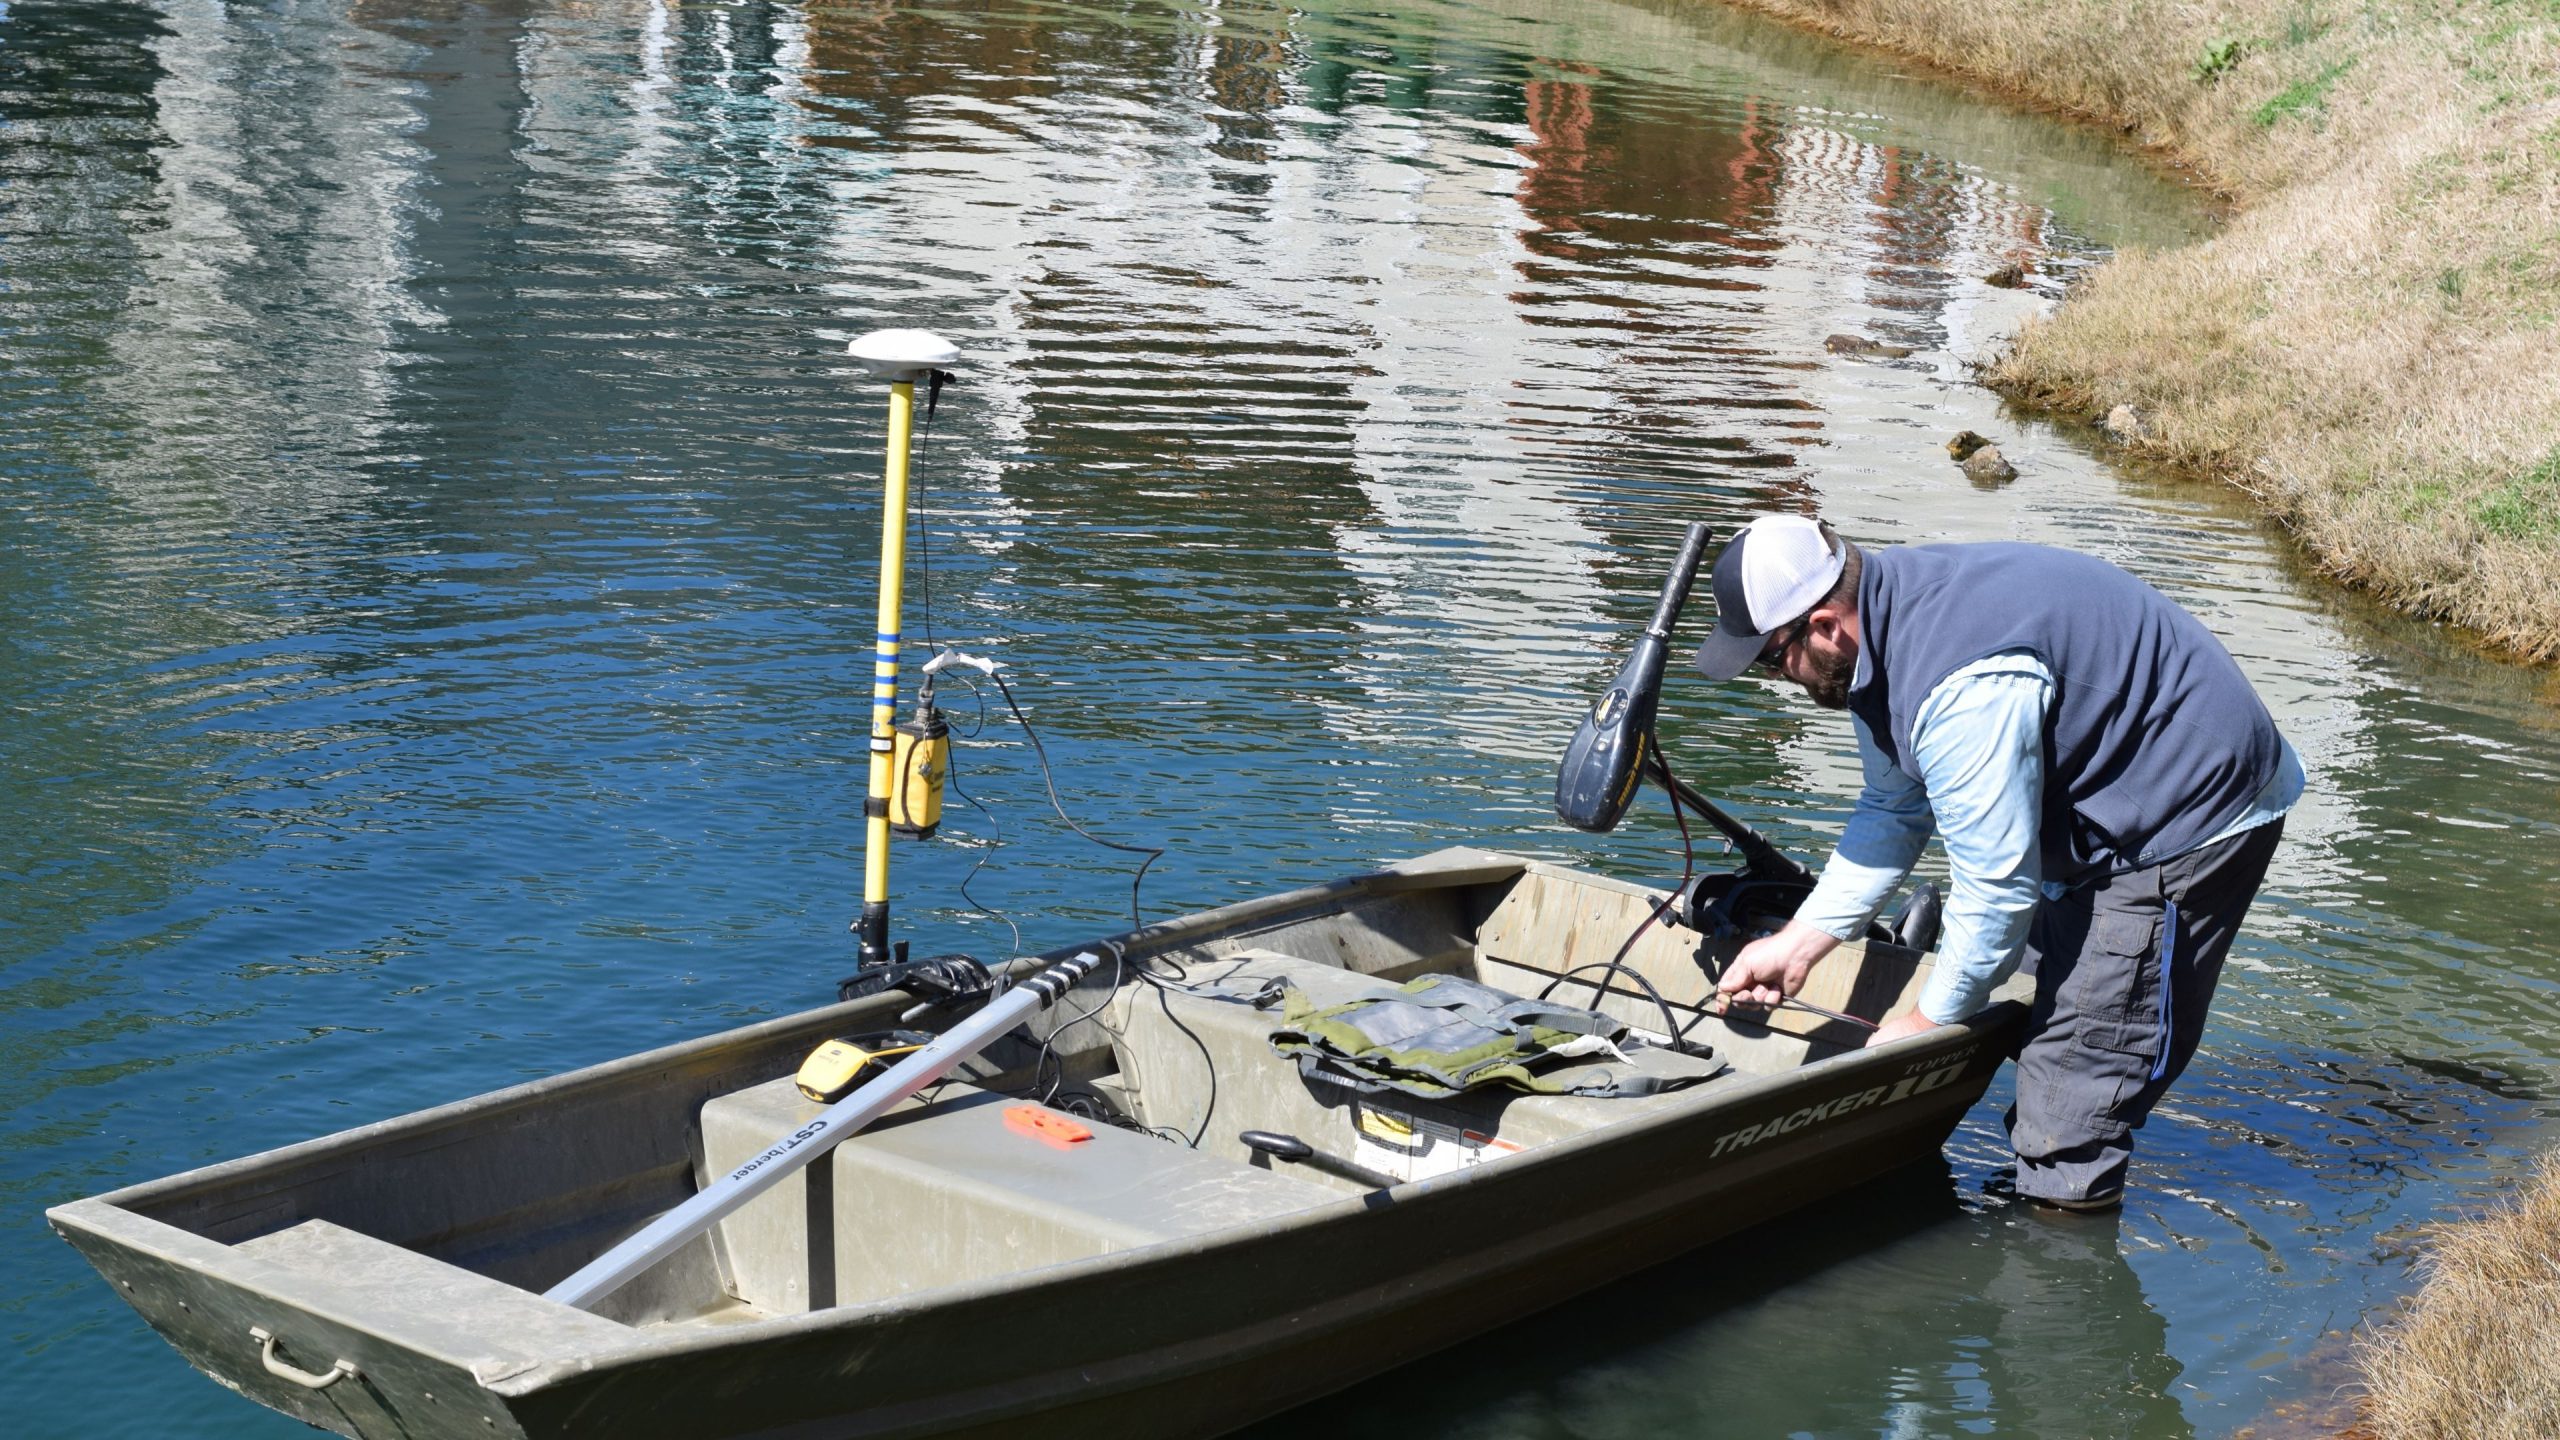 stormwater compliance lake mapping bathymetry assessing boat mapping equipment data collection water quality testing water depth water assessment